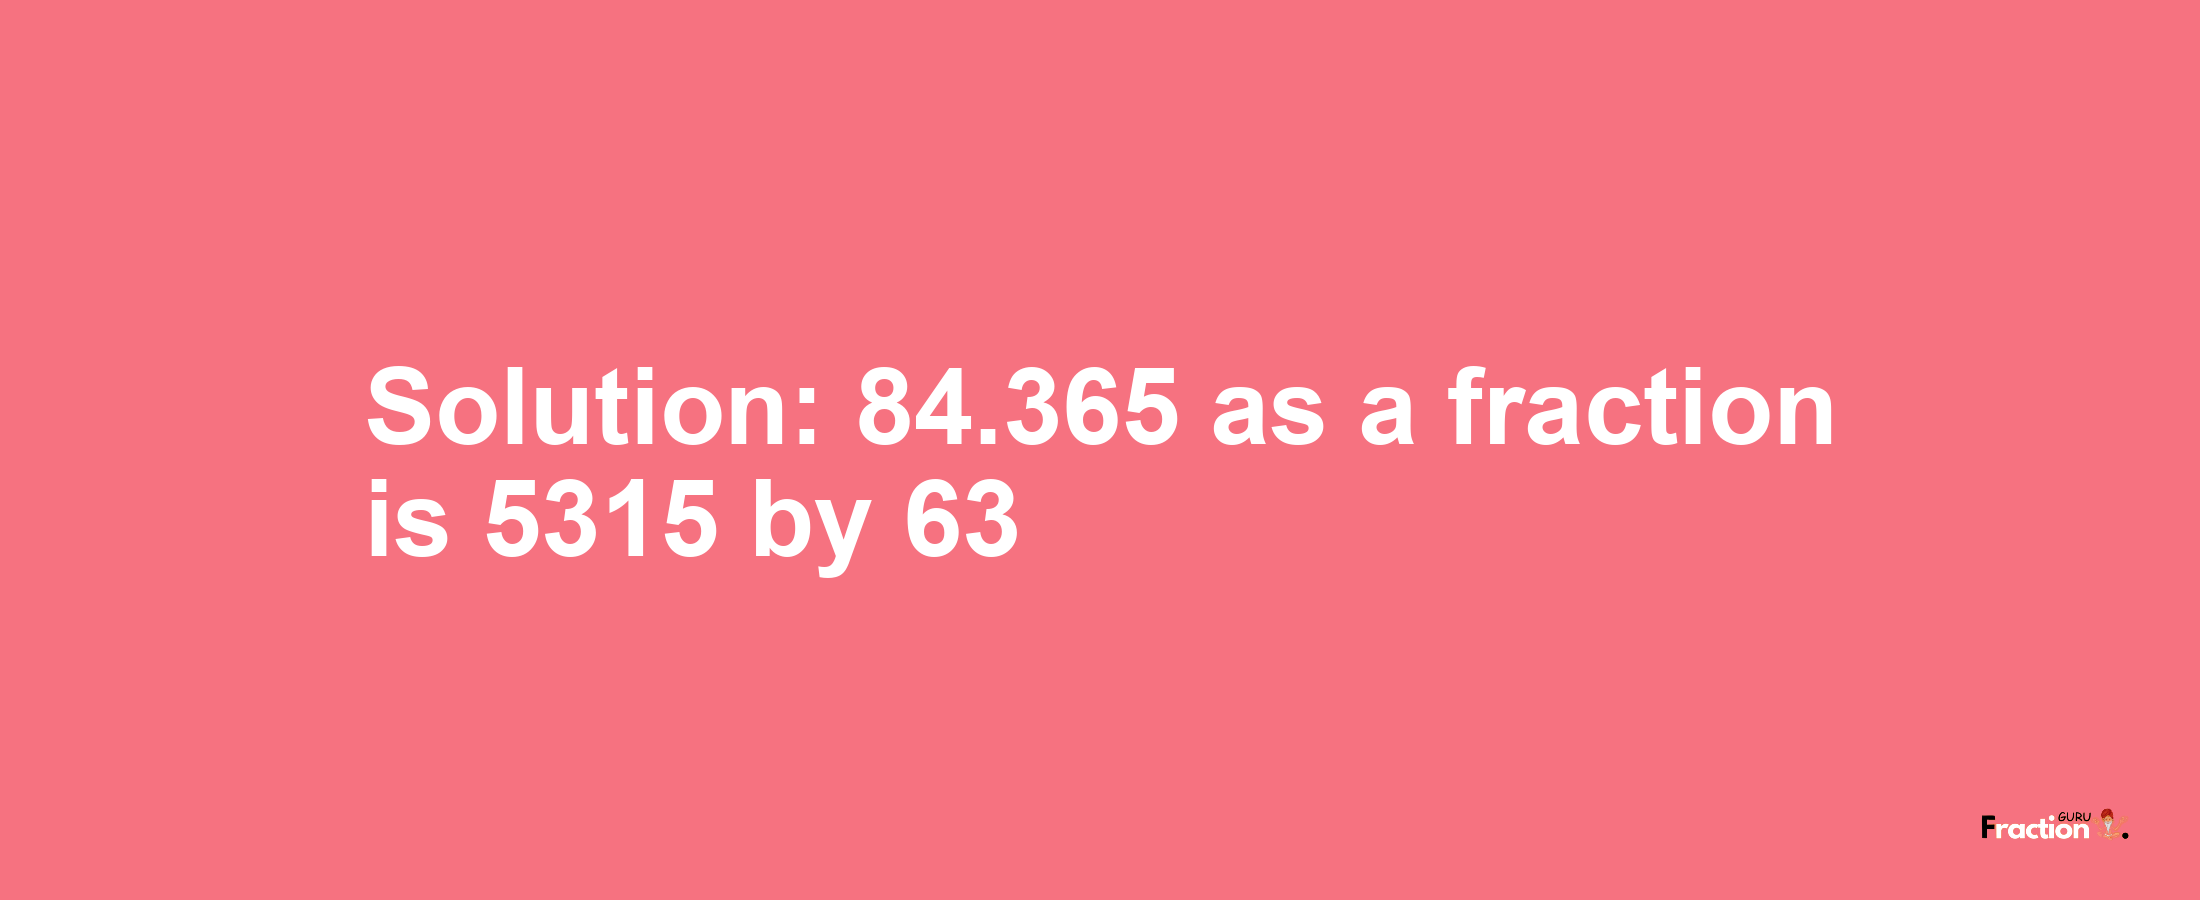 Solution:84.365 as a fraction is 5315/63